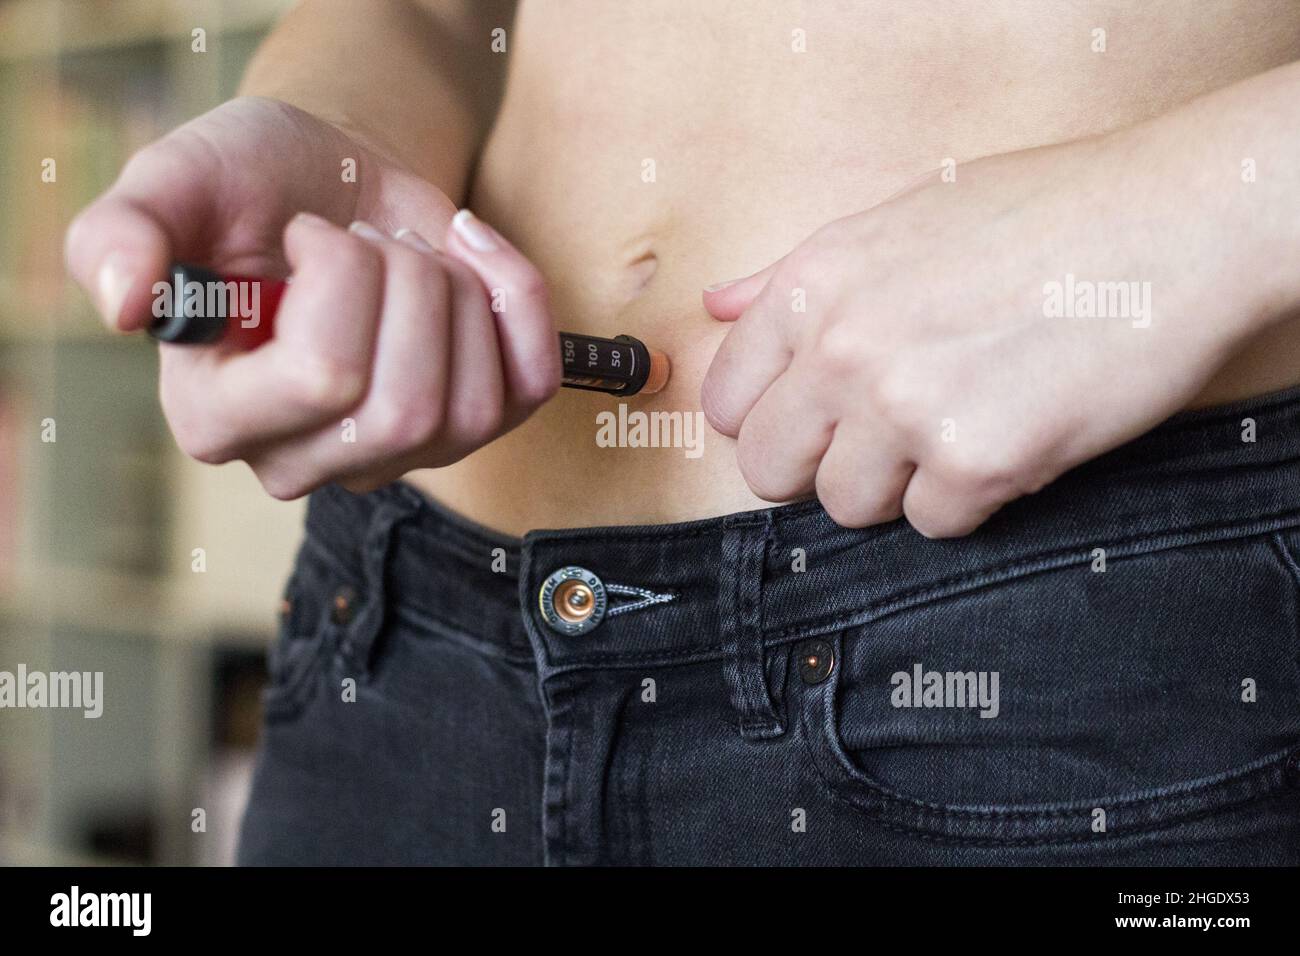 Woman injecting insulin in belly Stock Photo